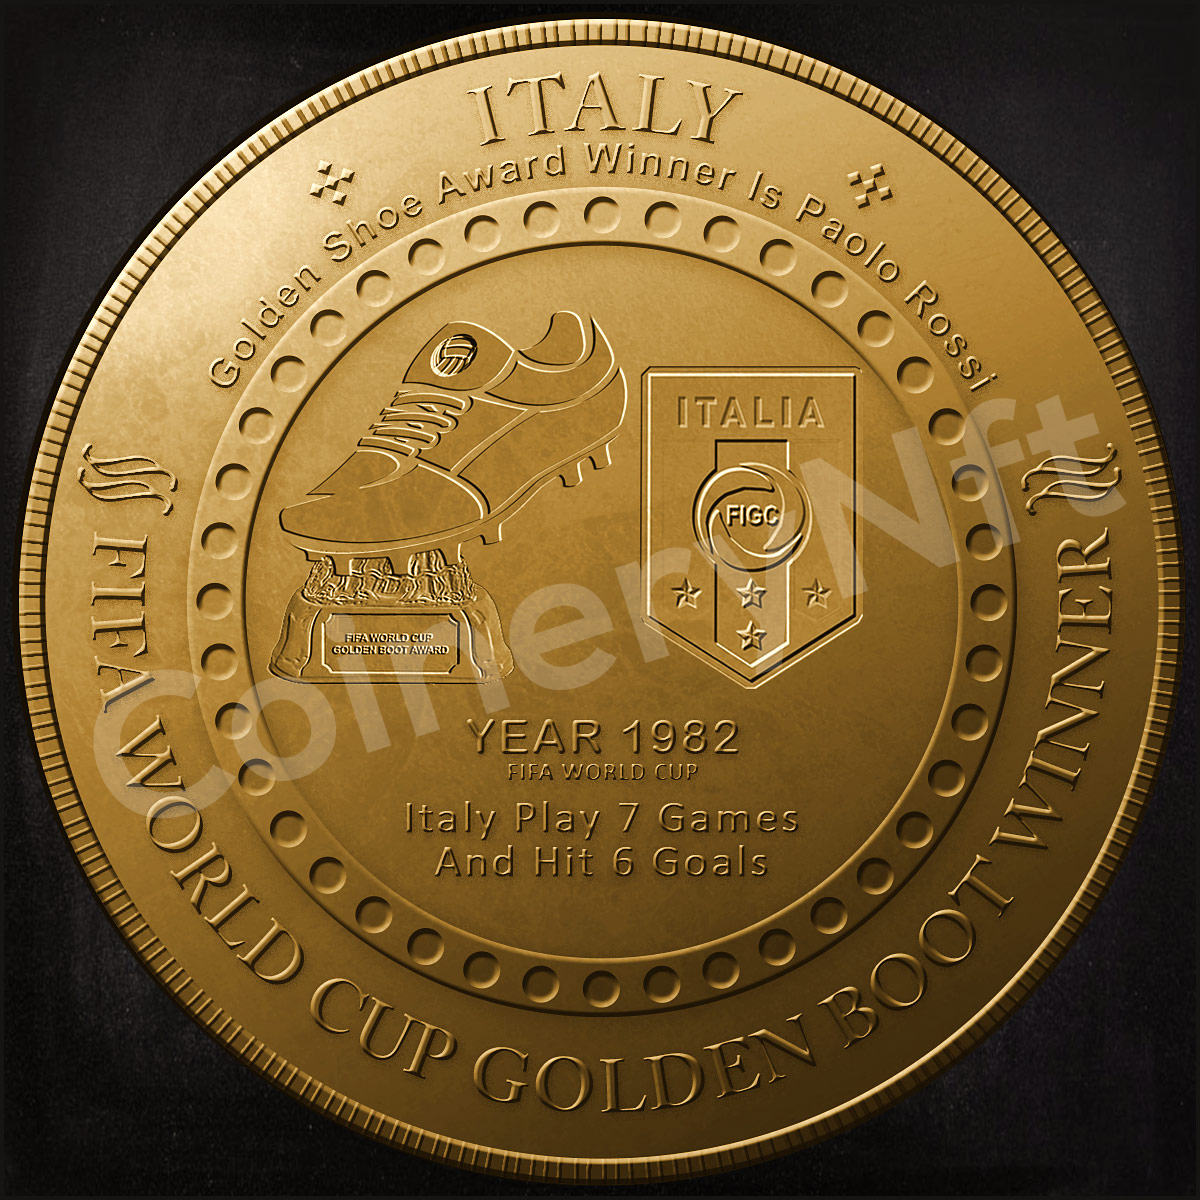 FIFA World Cup Golden Boot Winner 1982, was won by Paolo Rossi (Italy). There is an NFT coin made in memory of this event.
@opensea @FIFAWorldCup @fifamedia @FIFAcom
#nftcommunity #nftcollector #nftinvestor #nftnews #nftmagazine #nftbuyers #NFTshills #nftgame #cryptonews #NFT